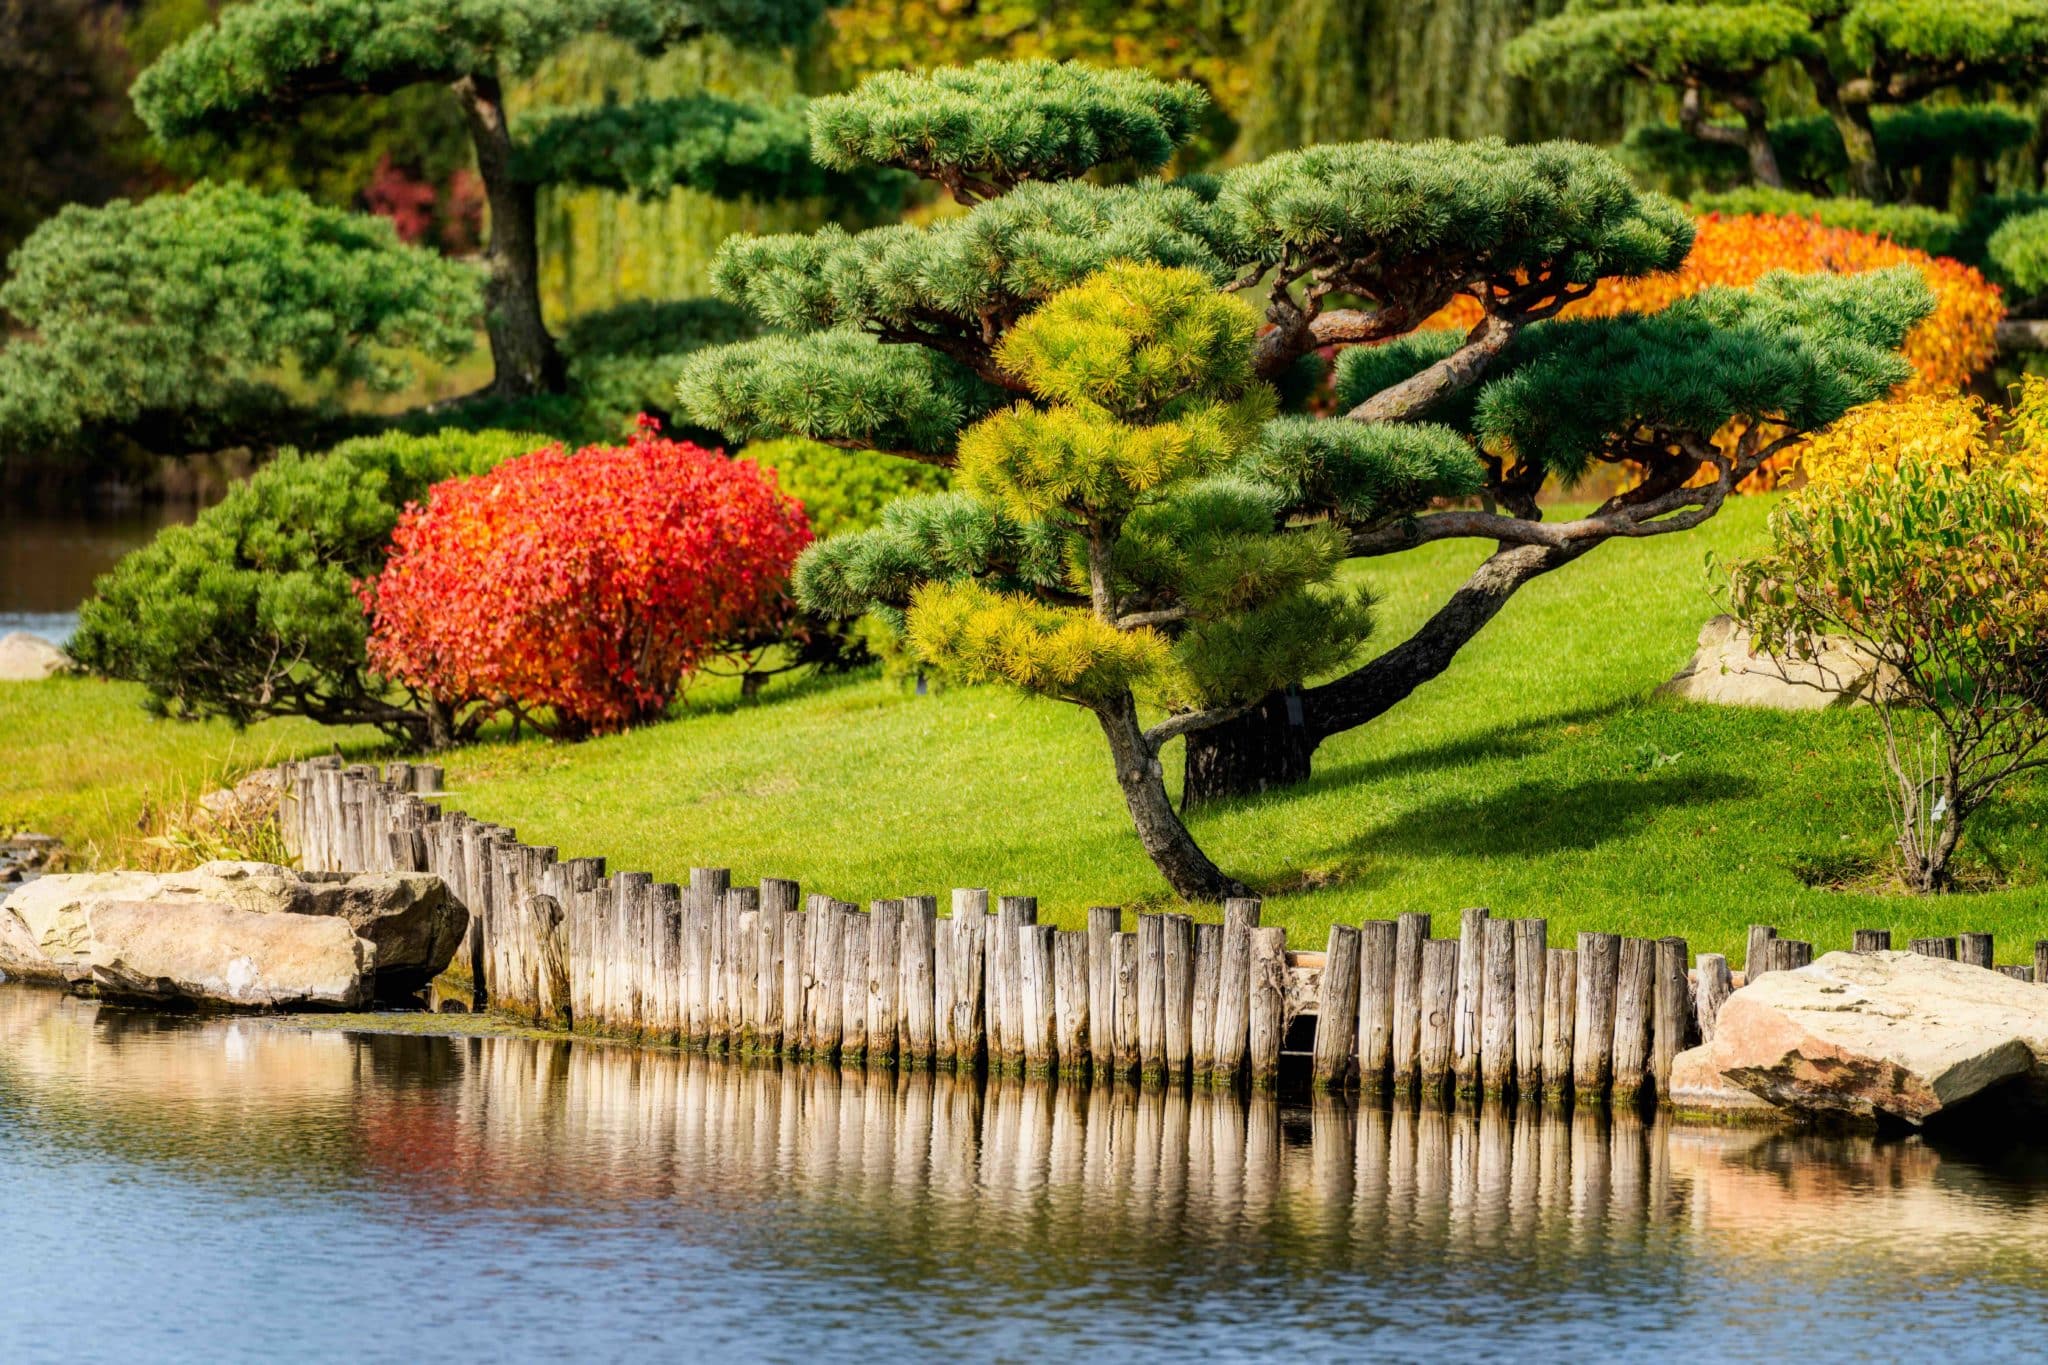 bonsai trees changing colors in the middle of Autumn at the Chicago Botanic Garden